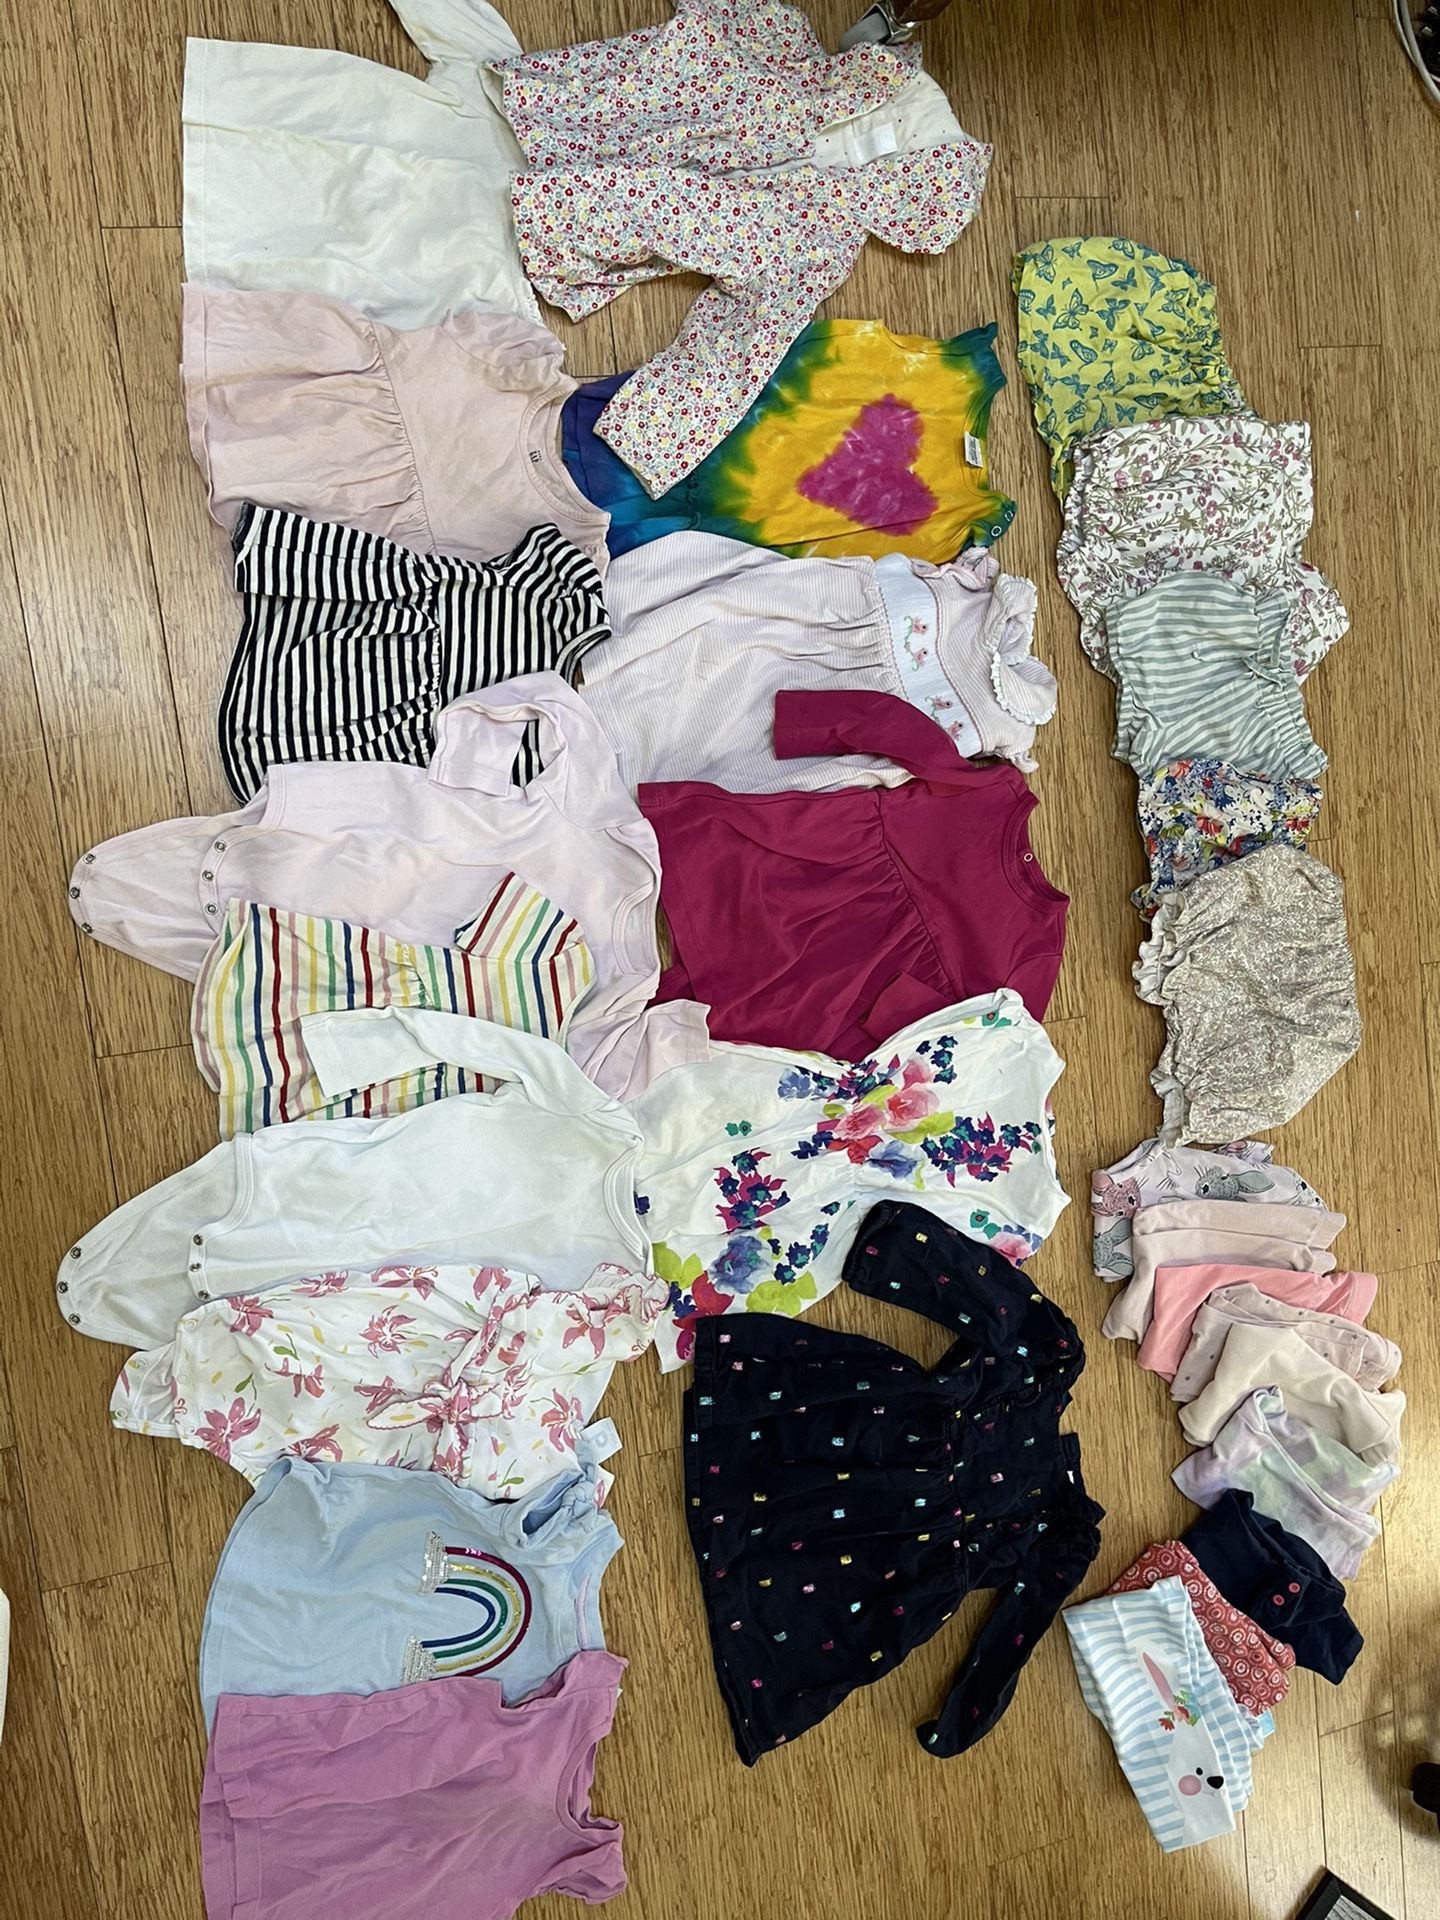 LOT Of Baby Girl Clothes Size 18mo-3t Over 30 Pieces Boutique Clothes 